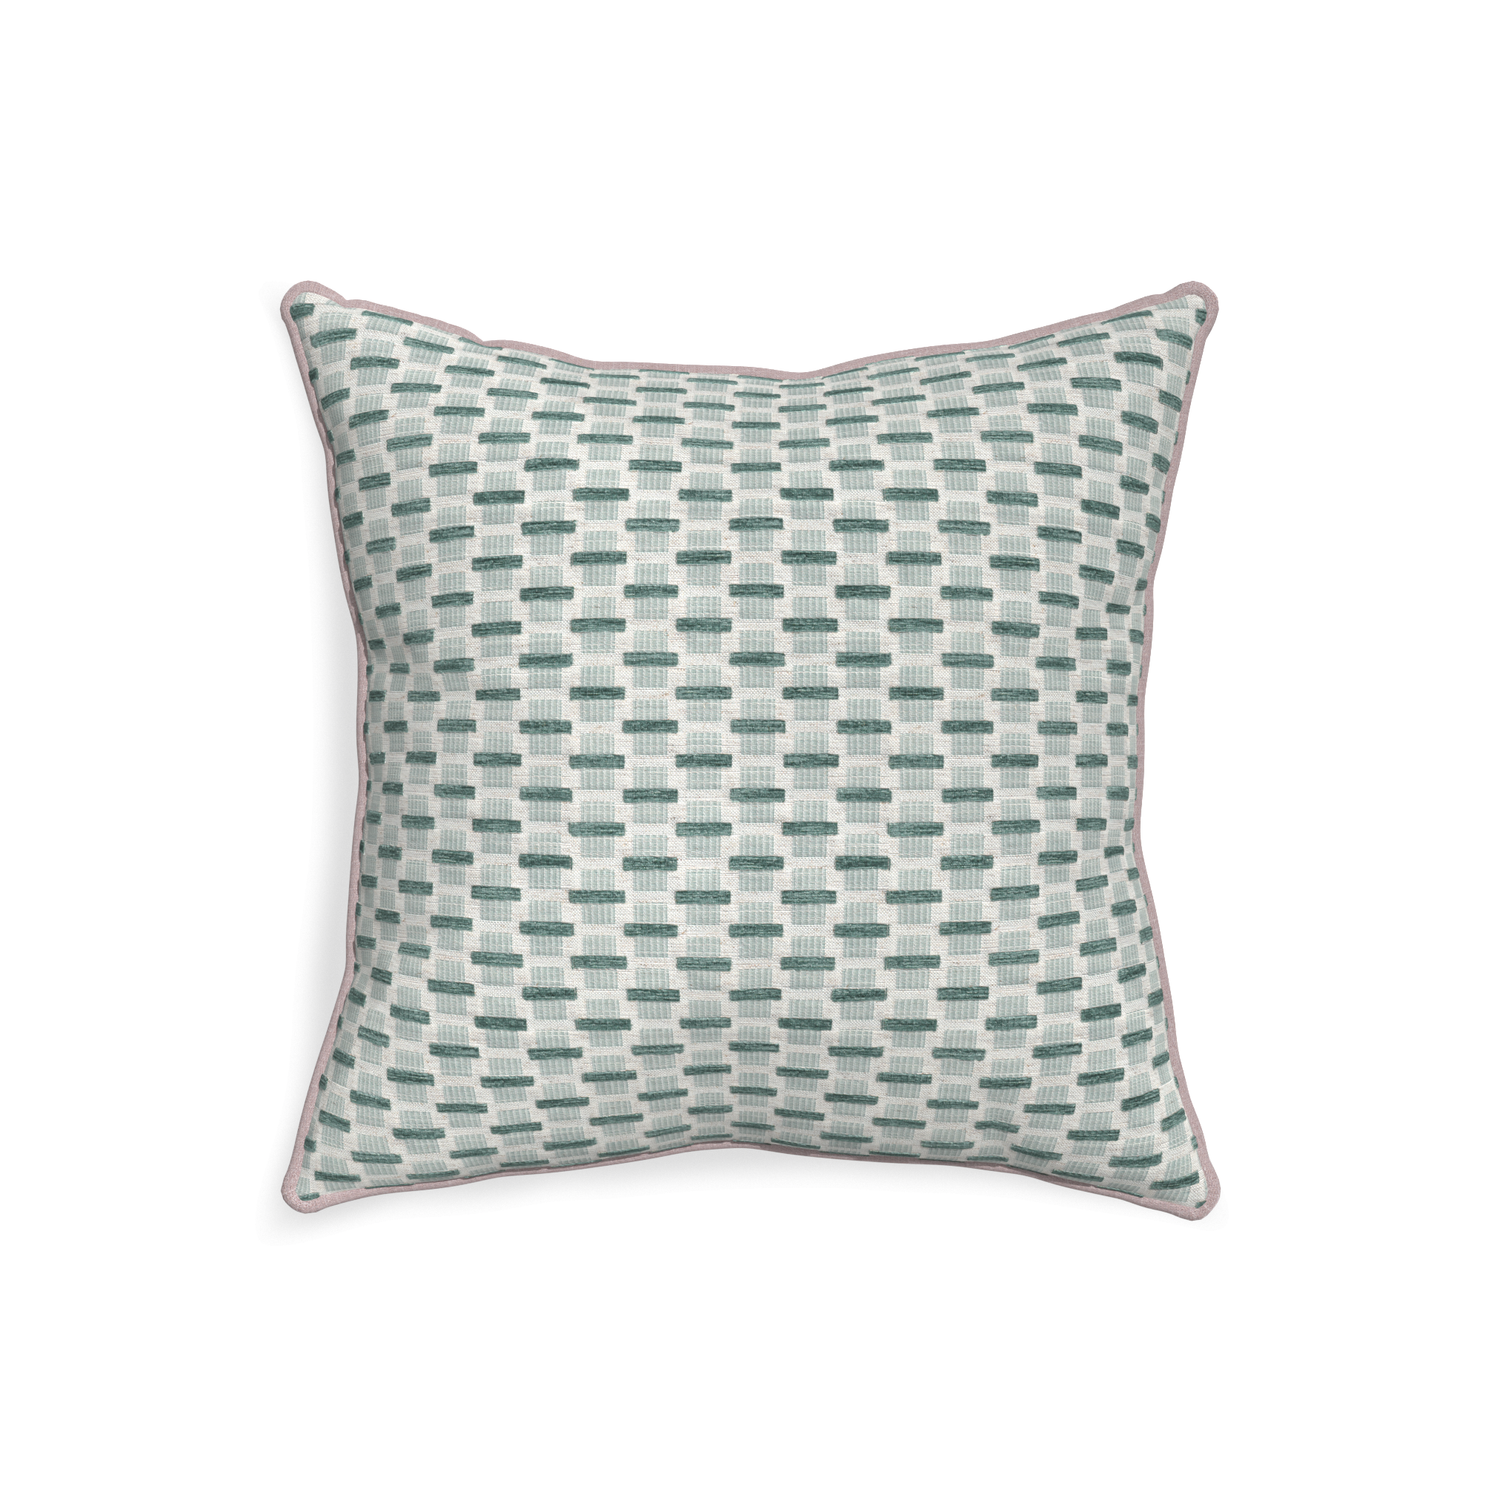 20-square willow mint custom green geometric chenillepillow with orchid piping on white background